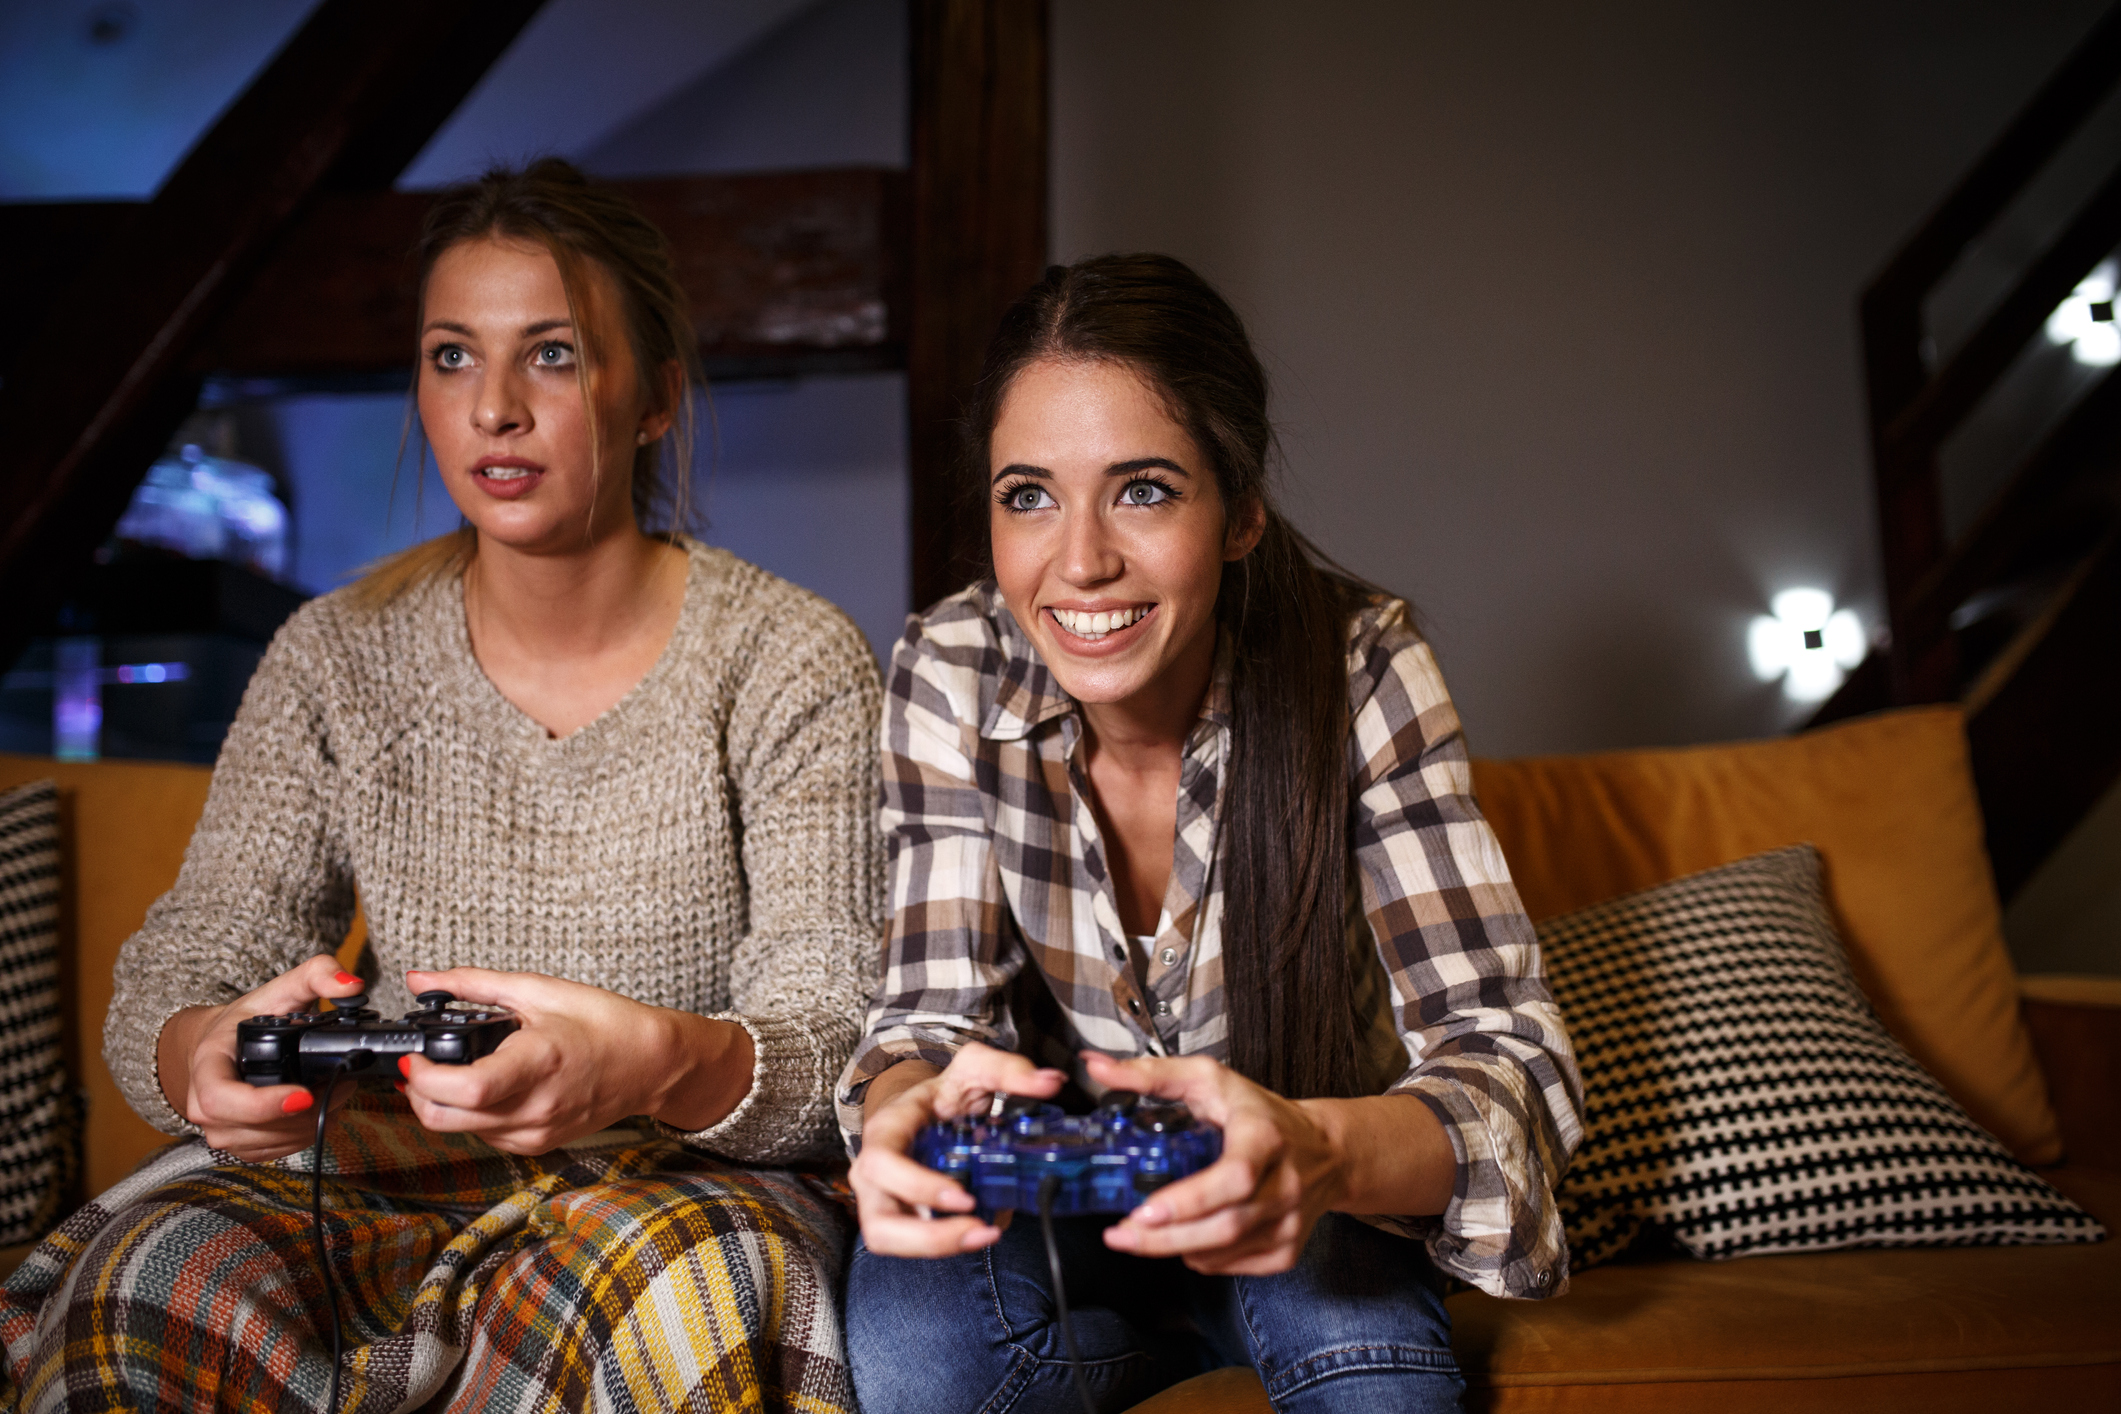 Two women playing a video game